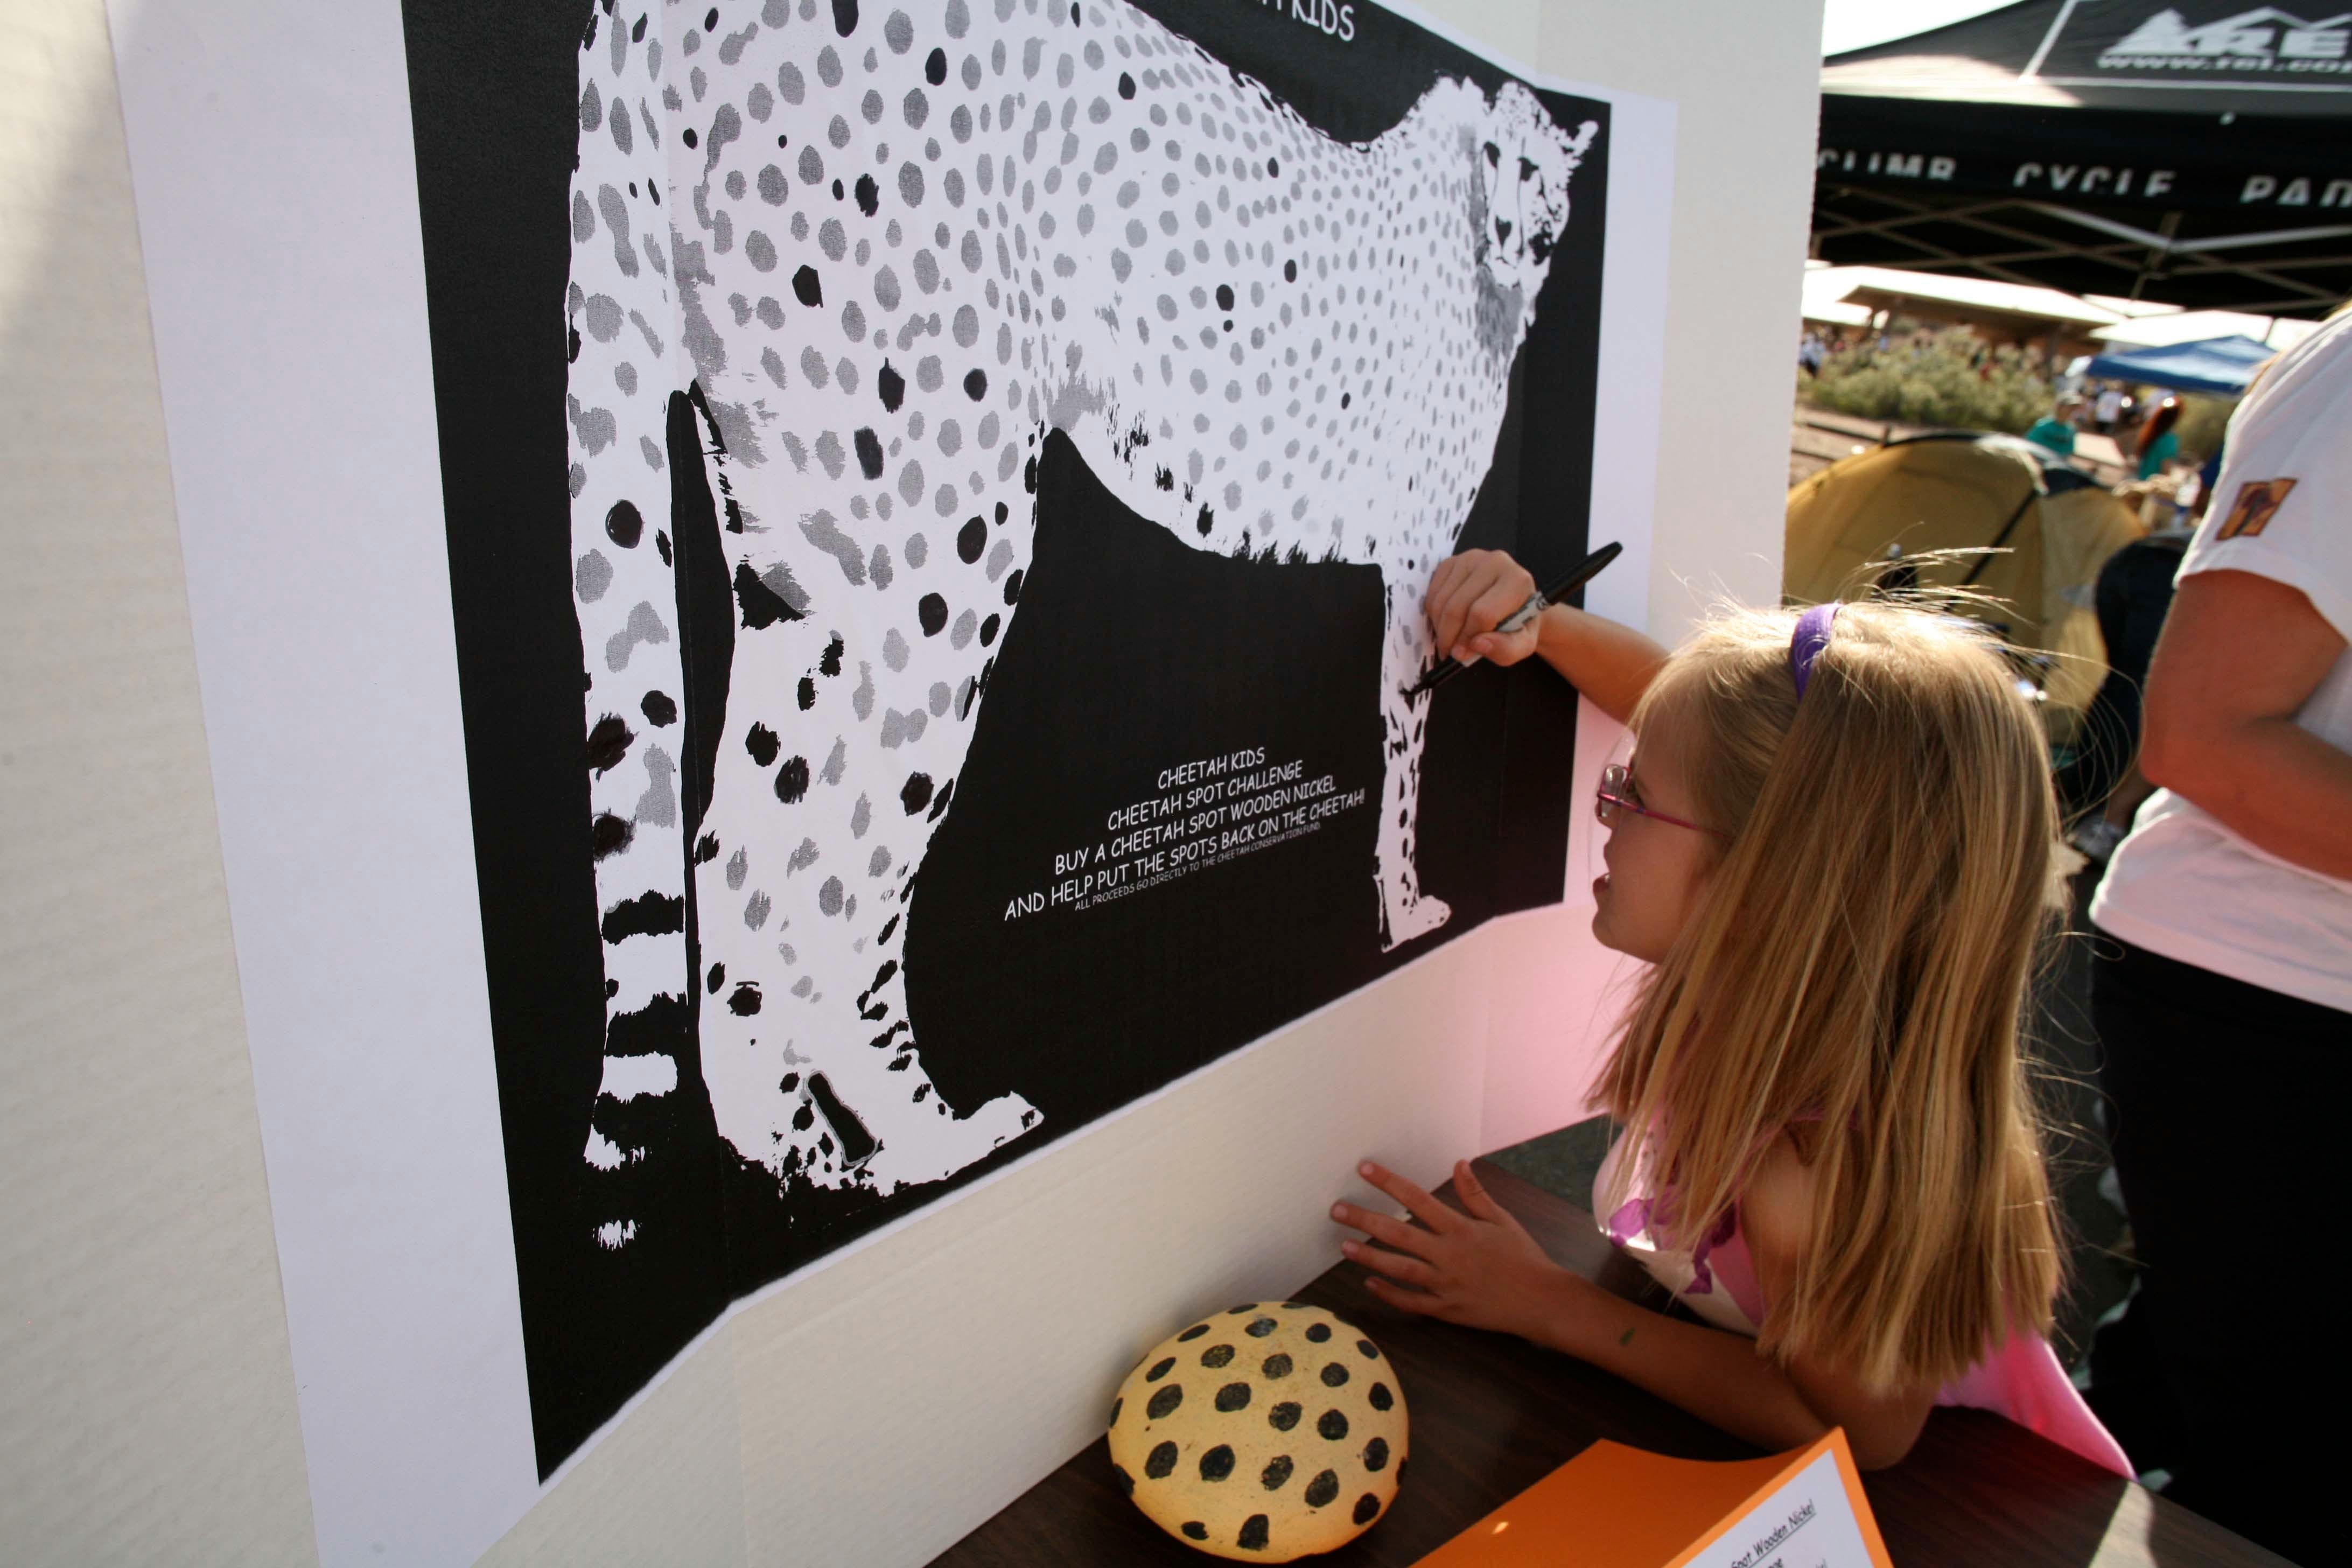 A great way to raise awareness and funds for cheetahs. Put the spots back on the cheetah. Color in the spots,